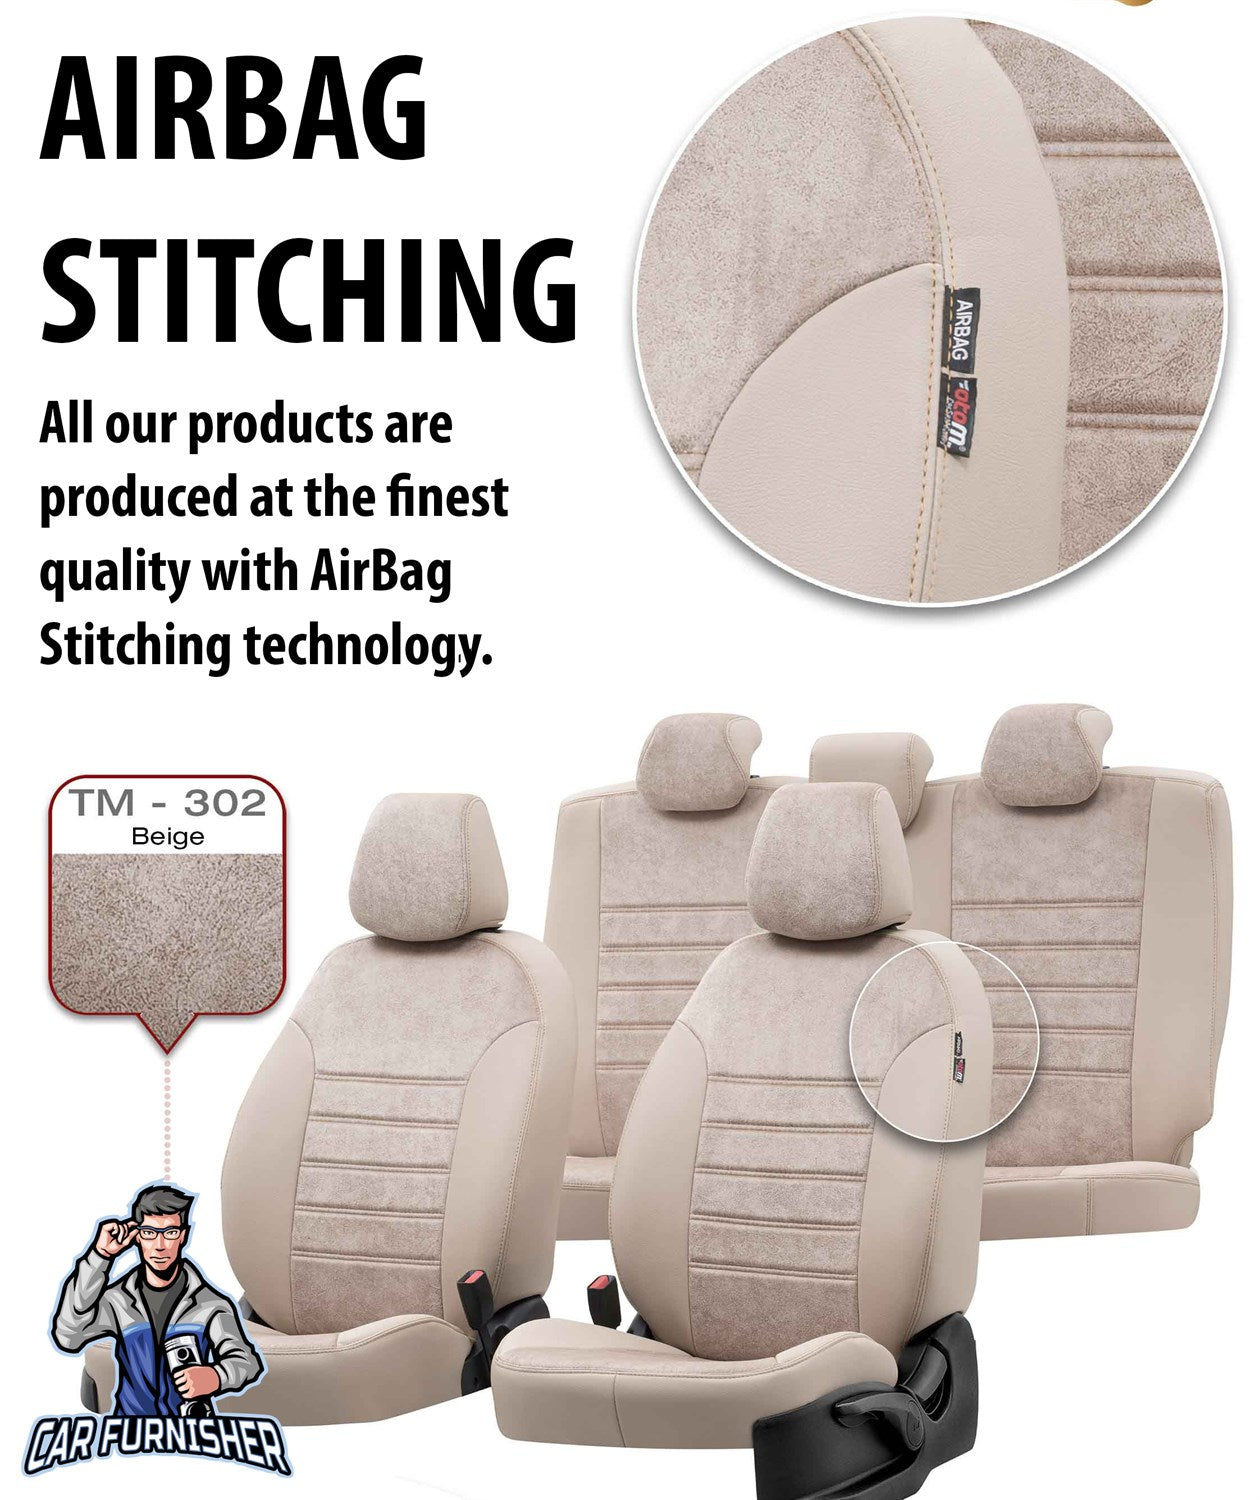 Landrover Freelander Car Seat Covers 1998-2012 Milano Design Ivory Leather & Suede Fabric